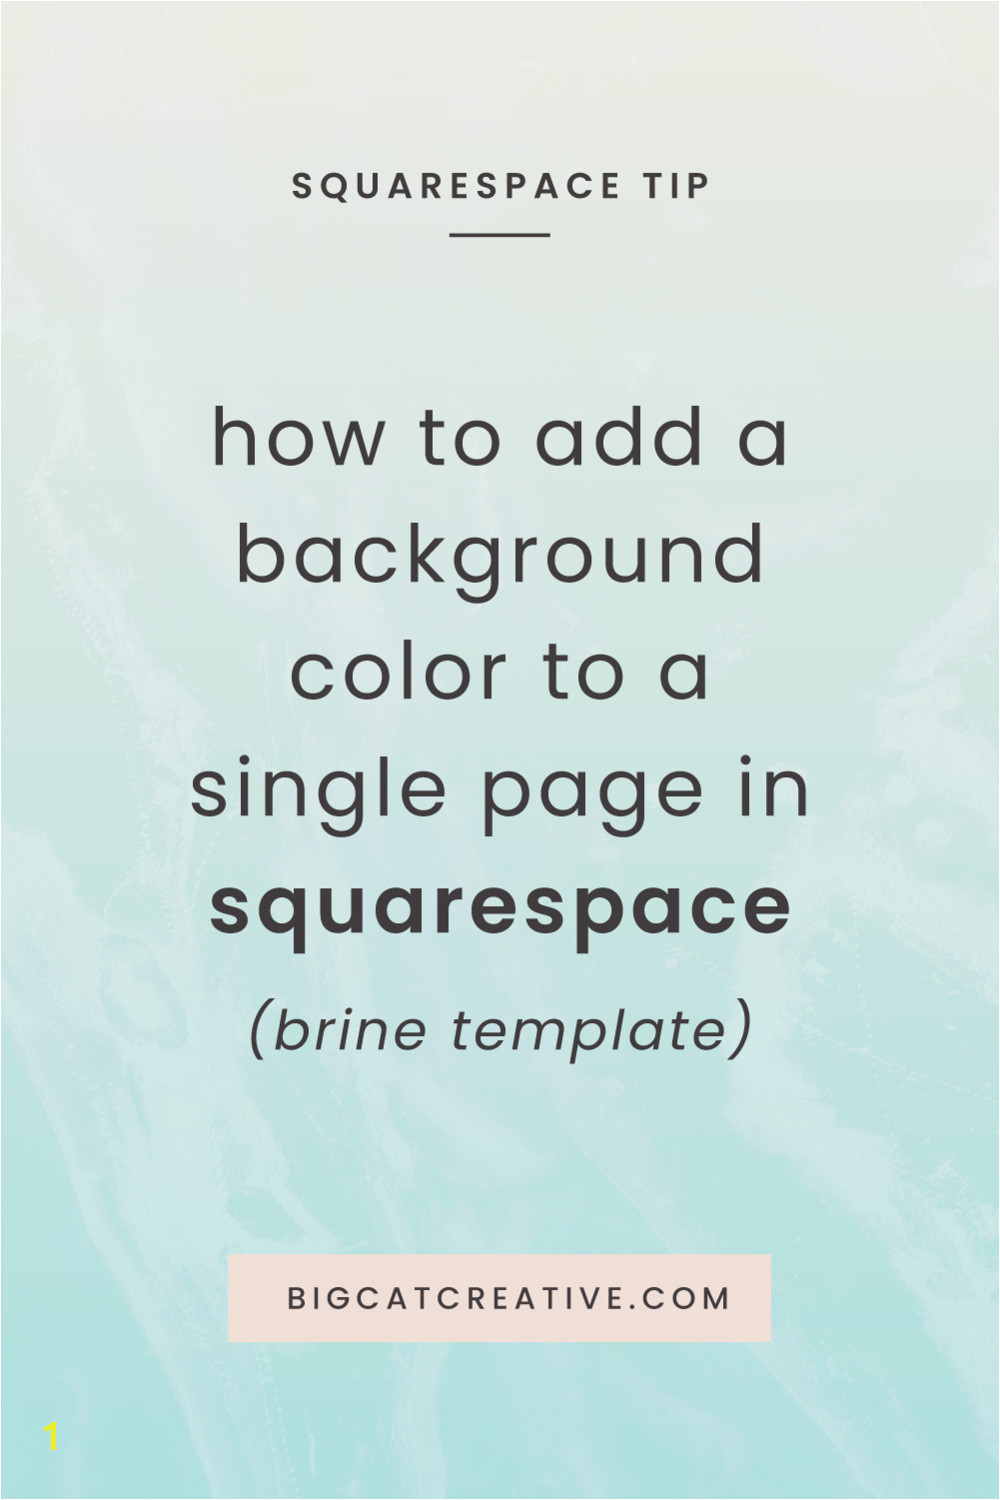 How to Change the Background Color of a Page in Squarespace with the Brine Template Squarespace Tips by Big Cat Creative Changing the Background of a PAge in Squarespace Squarespace Web Design Tutorials Squarespace Tutorials for Beginners Intermediate Squarespace Tutorials Squarespace CSS Tutorials Customize Your Page Background Color in Squarespace